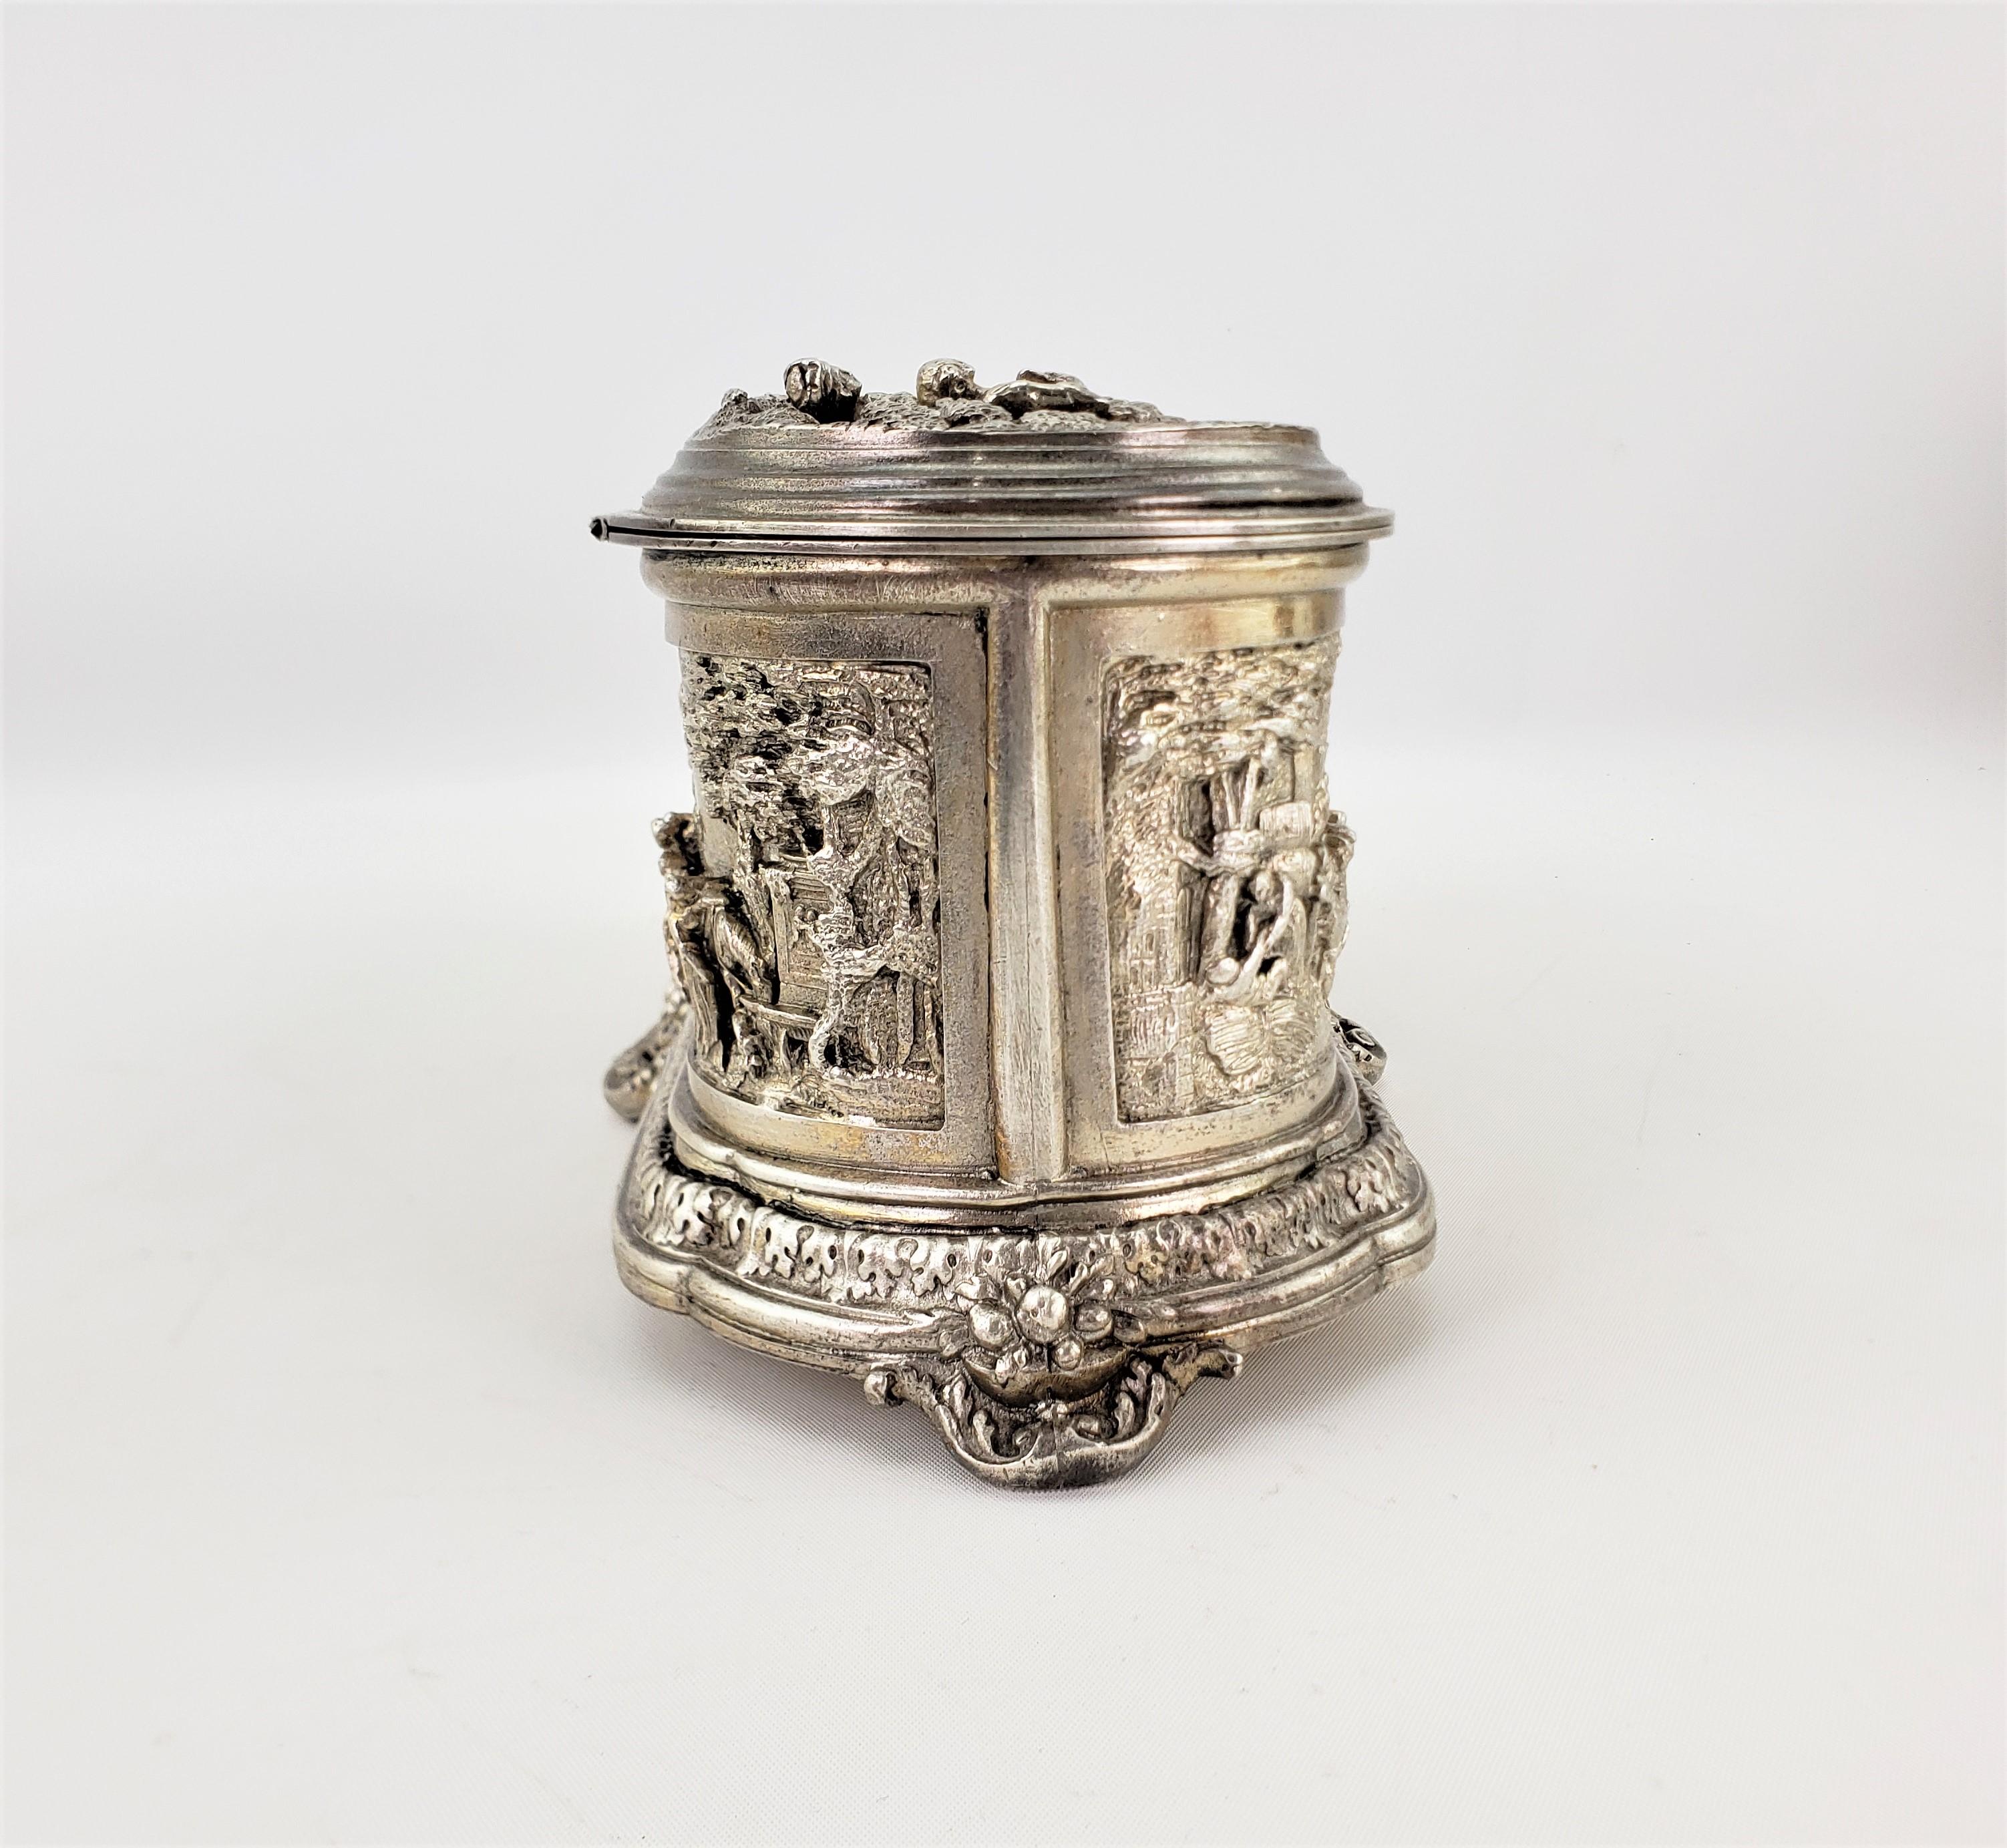 Renaissance Revival Large Antique Jewelry Casket or Box with Chased Vignettes and Lined Interior